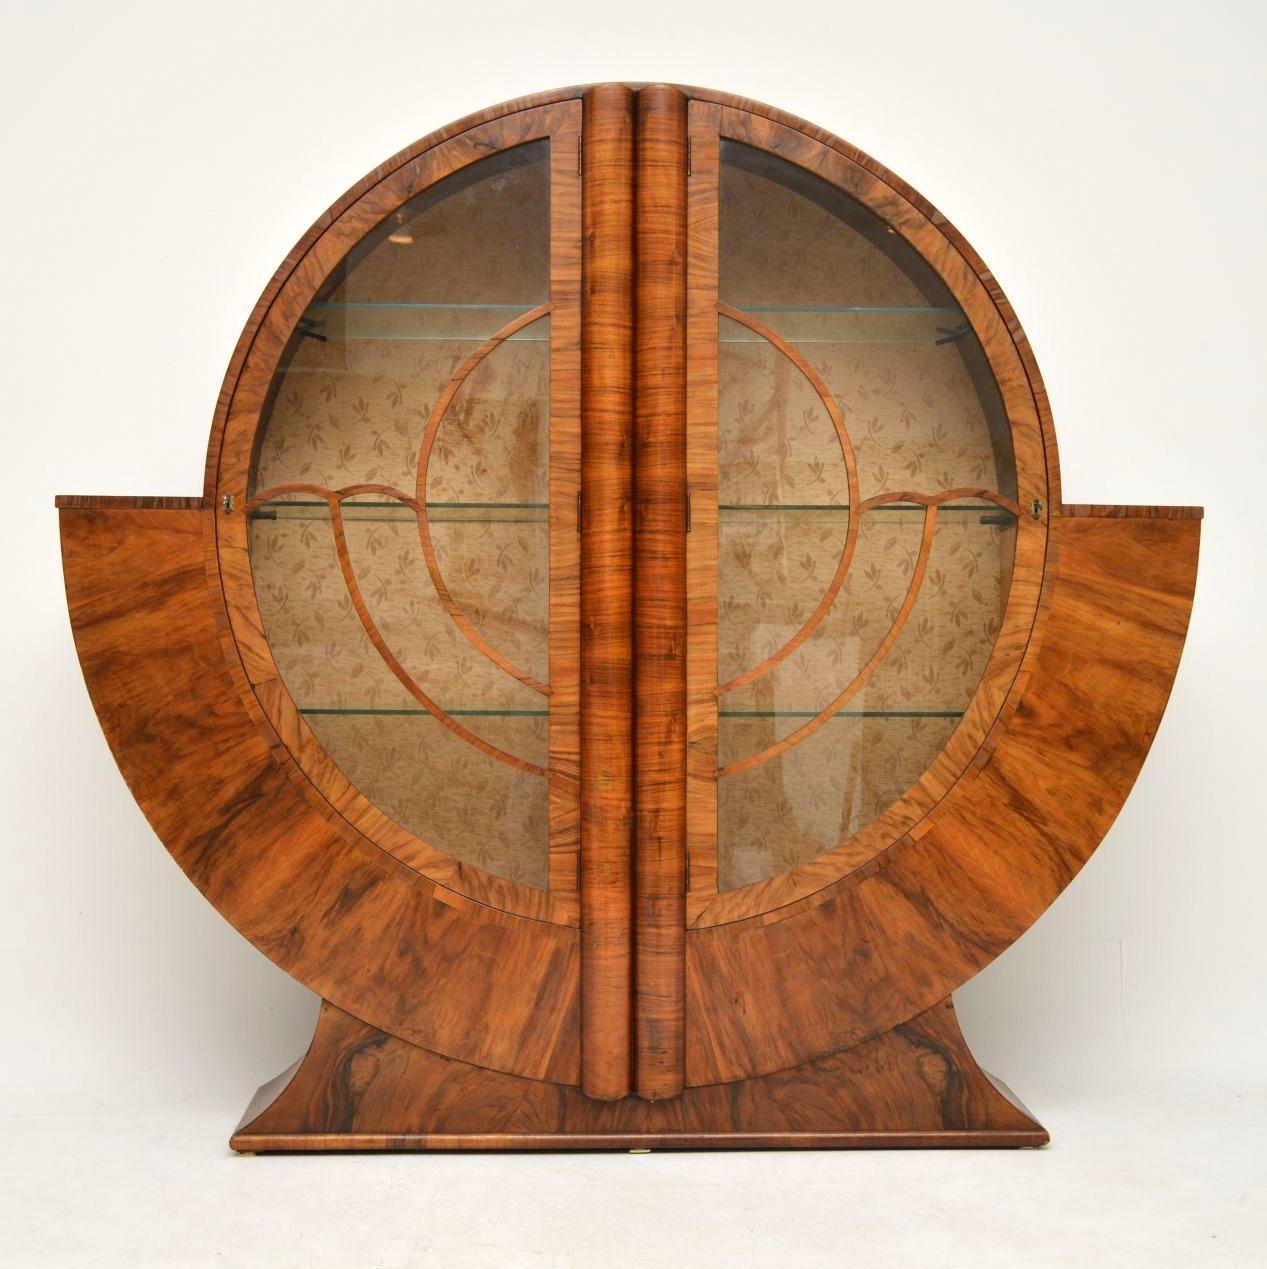 A stunning original Art Deco circular bookcase in Walnut, this dates from the 1920-1930s. It’s in great original condition, with a lovely polished finish, and just some very minor wear here and there. There are a couple of tiny chips to the veneer